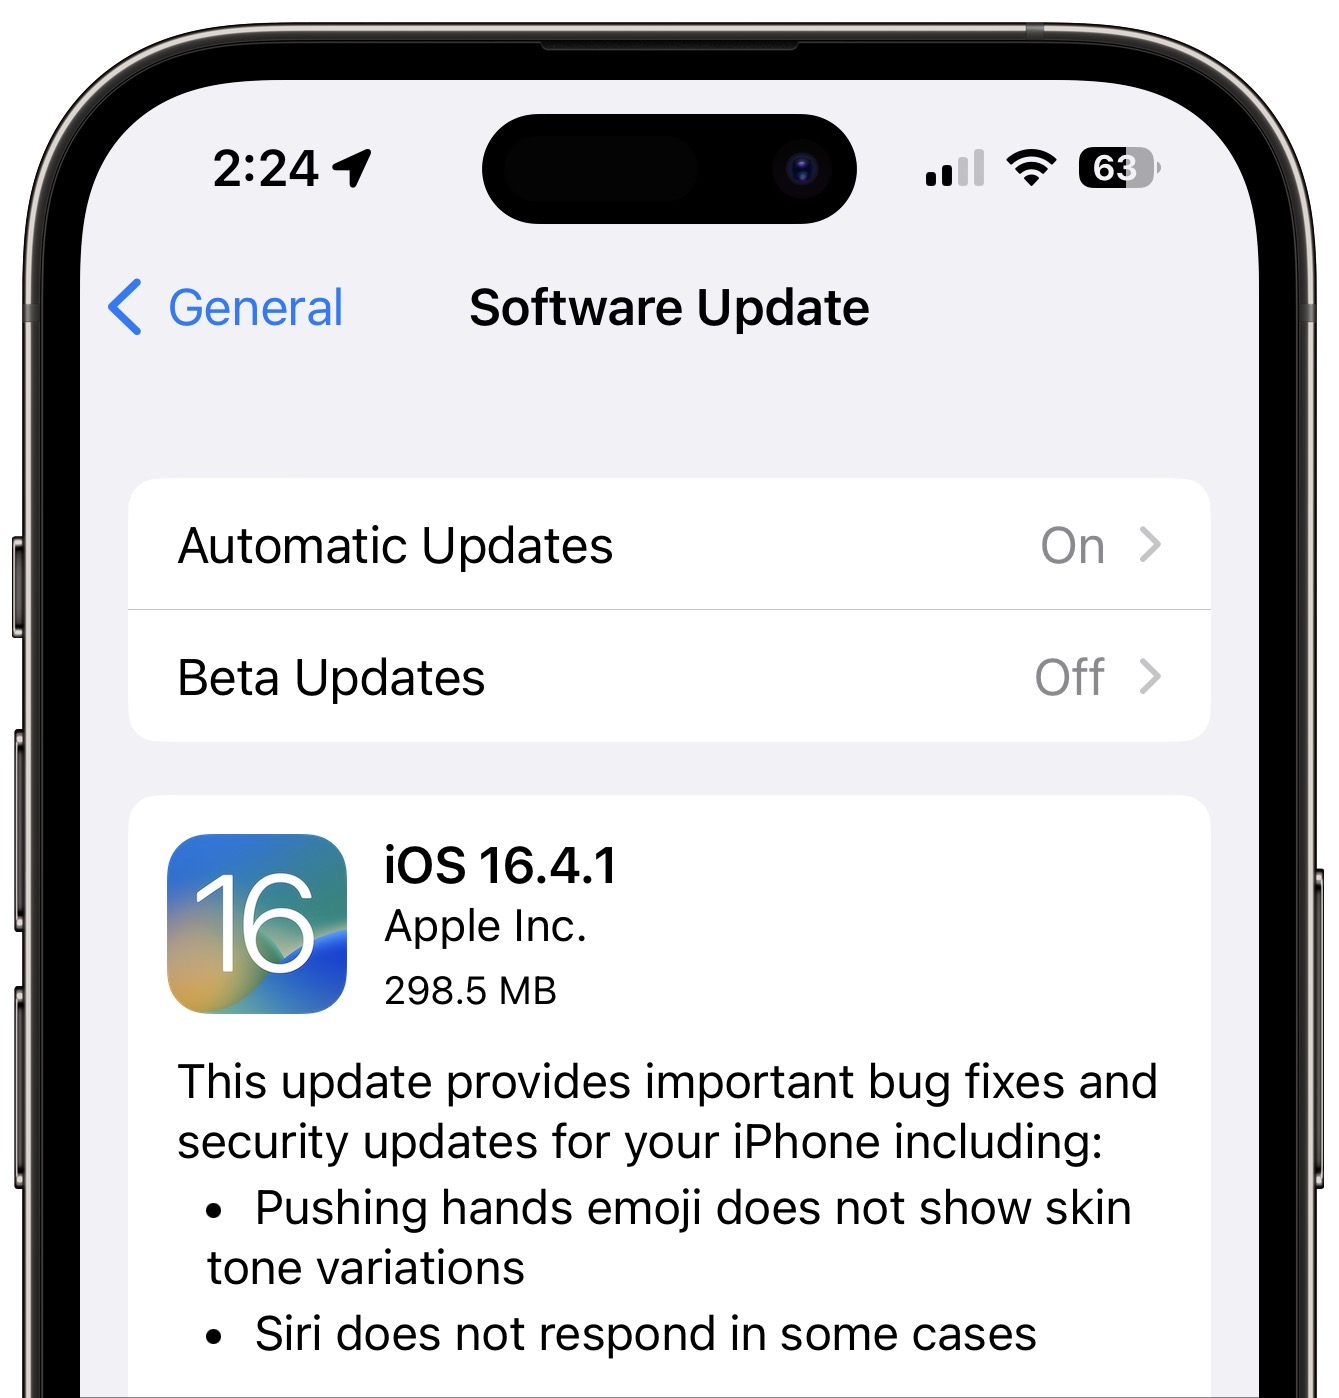 iOS 16.4.1 release notes